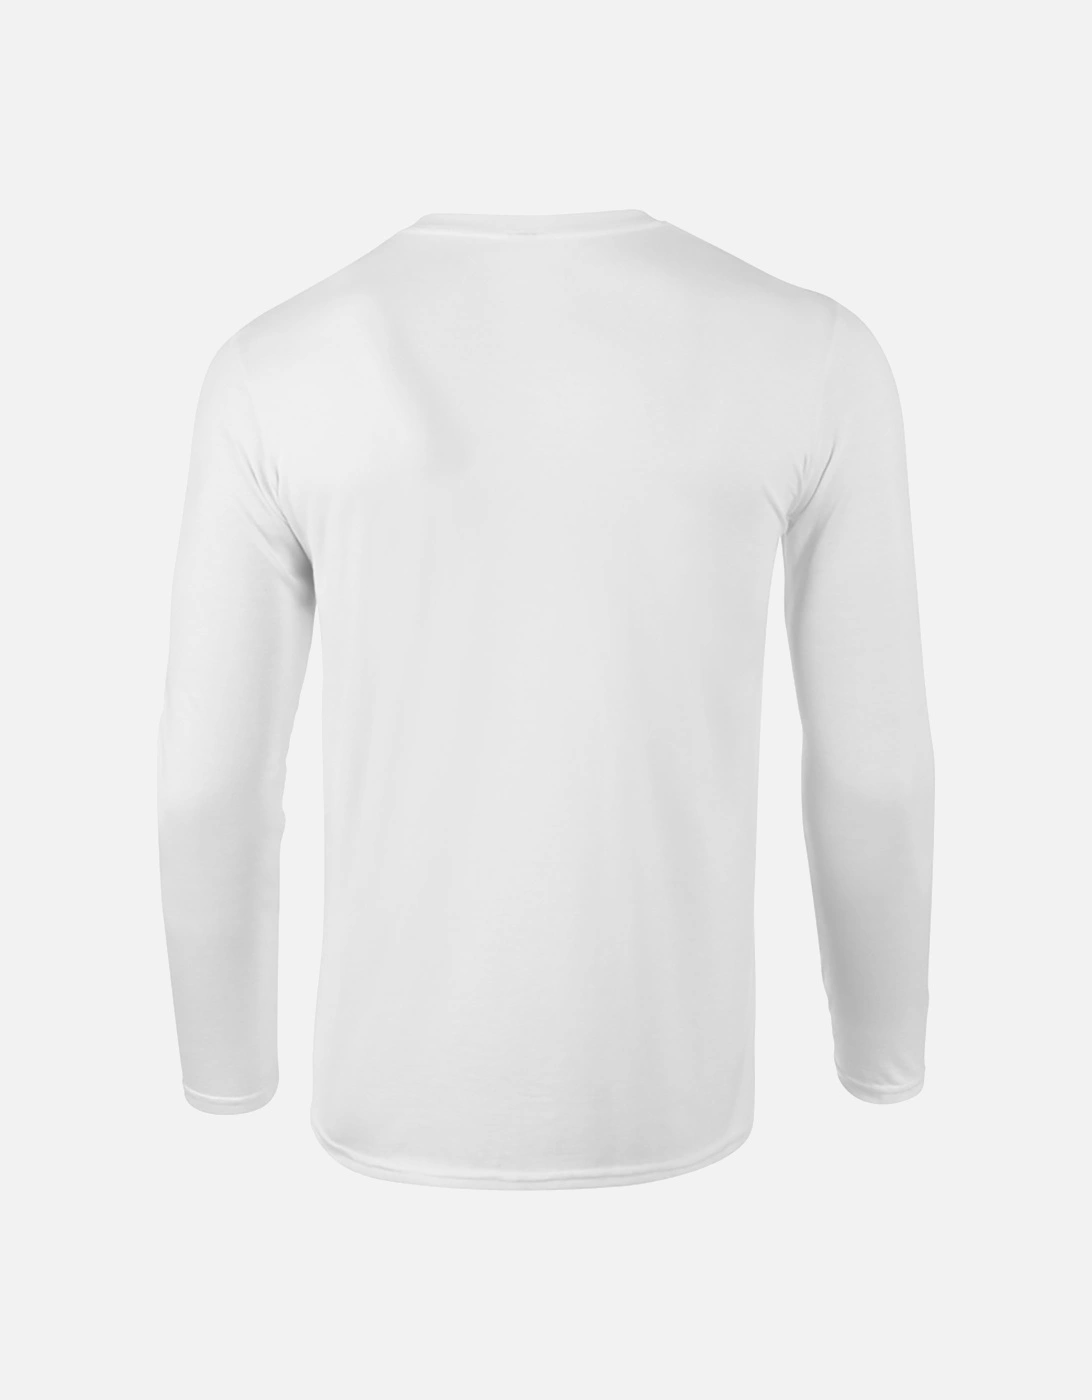 Mens Soft Style Long Sleeve T-Shirt (Pack Of 5)